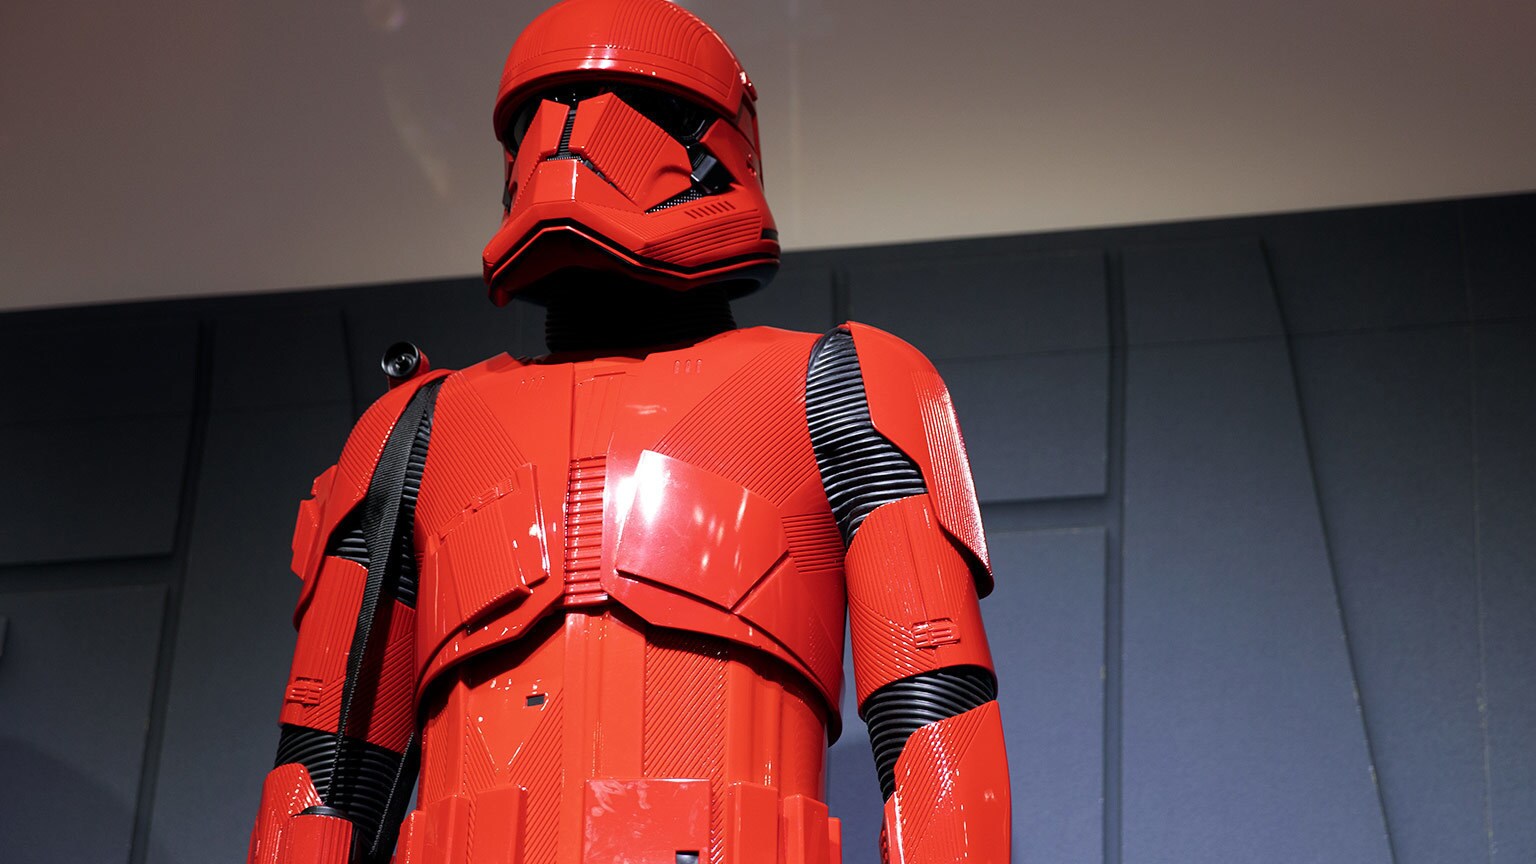 SDCC 2019: Sith Trooper from Star Wars: The Rise of Skywalker Revealed